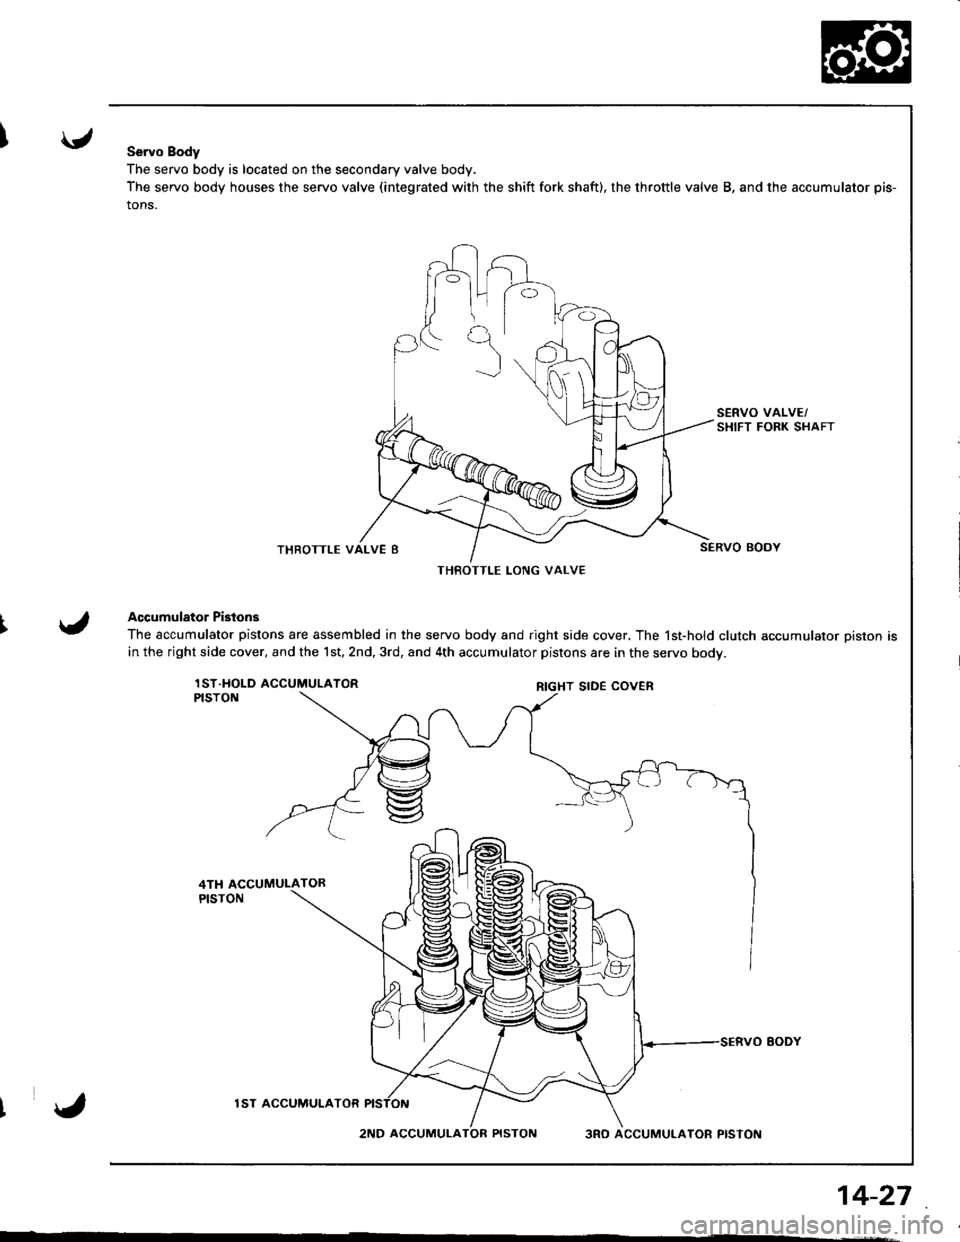 HONDA INTEGRA 1998 4.G Workshop Manual Servo Body
The servo body is located on the secondary valve body.
The servo body houses the servo valve (integrated with the shift fork shaft), the throttle valve B, and the accumulator pis-
tons.
THR